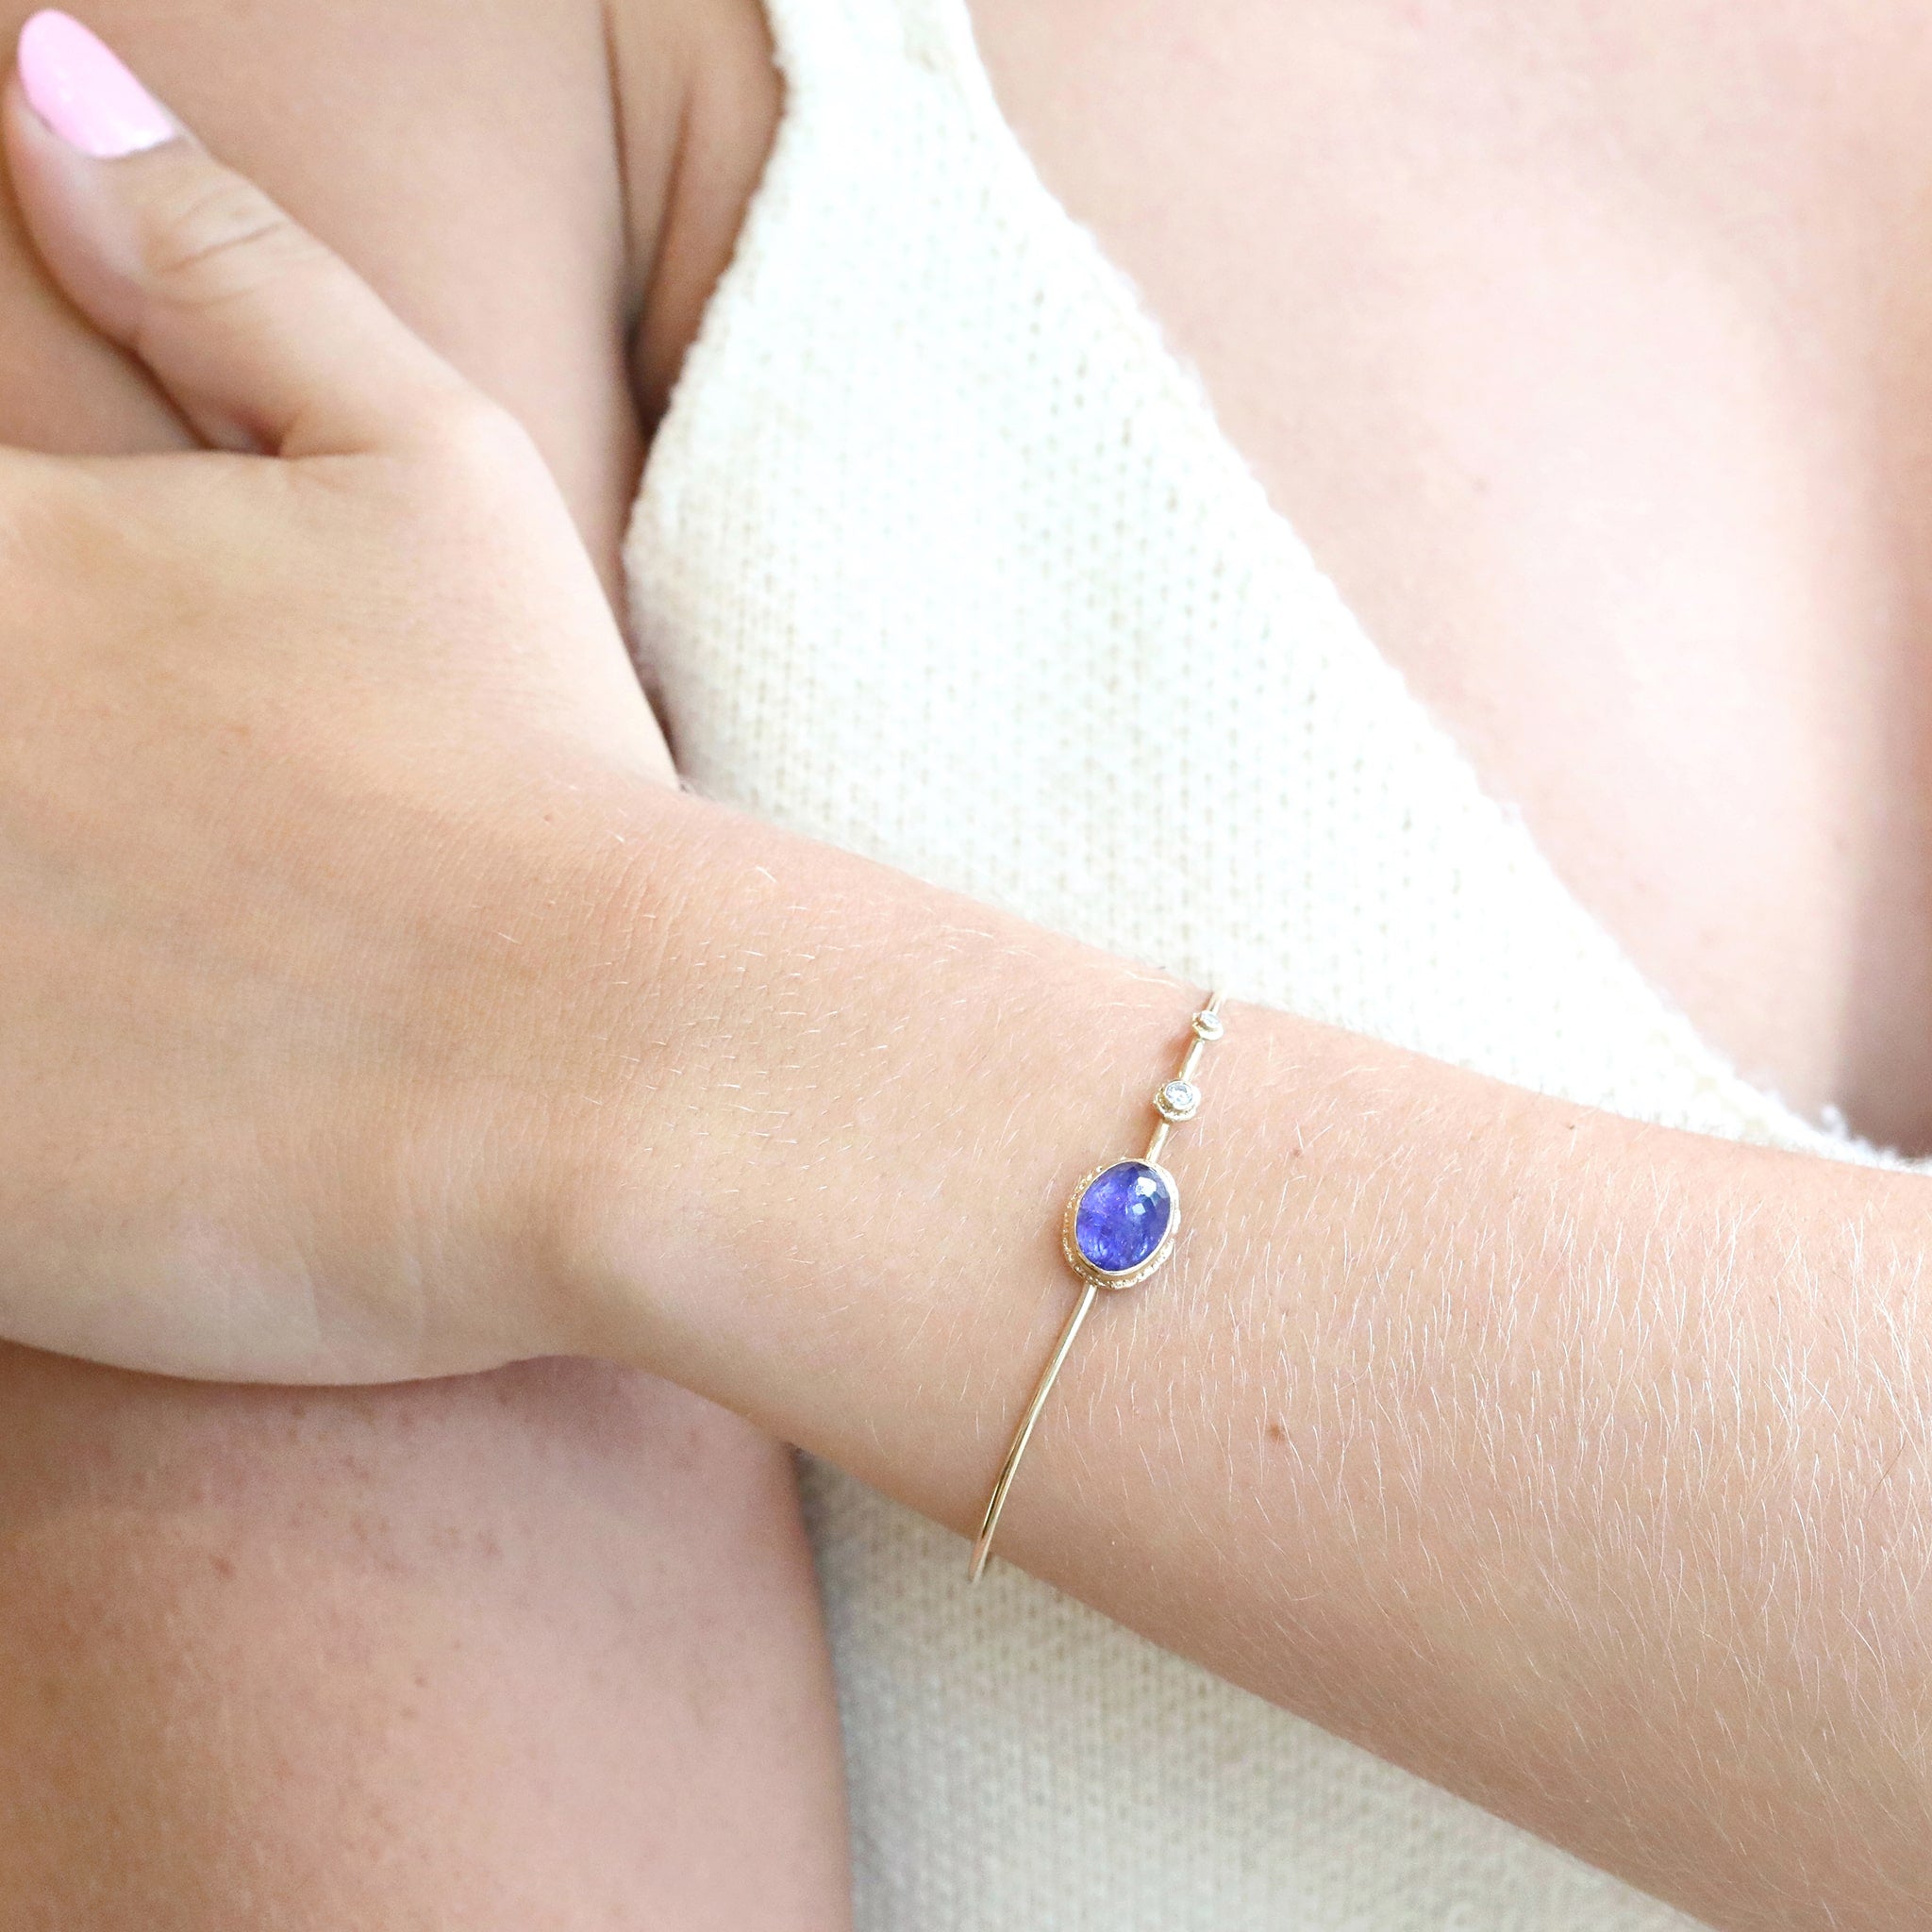 14K Gold Bracelet with Oval Inverted Tanzanite and Two Diamond Accents - Peridot Fine Jewelry - Jamie Joseph